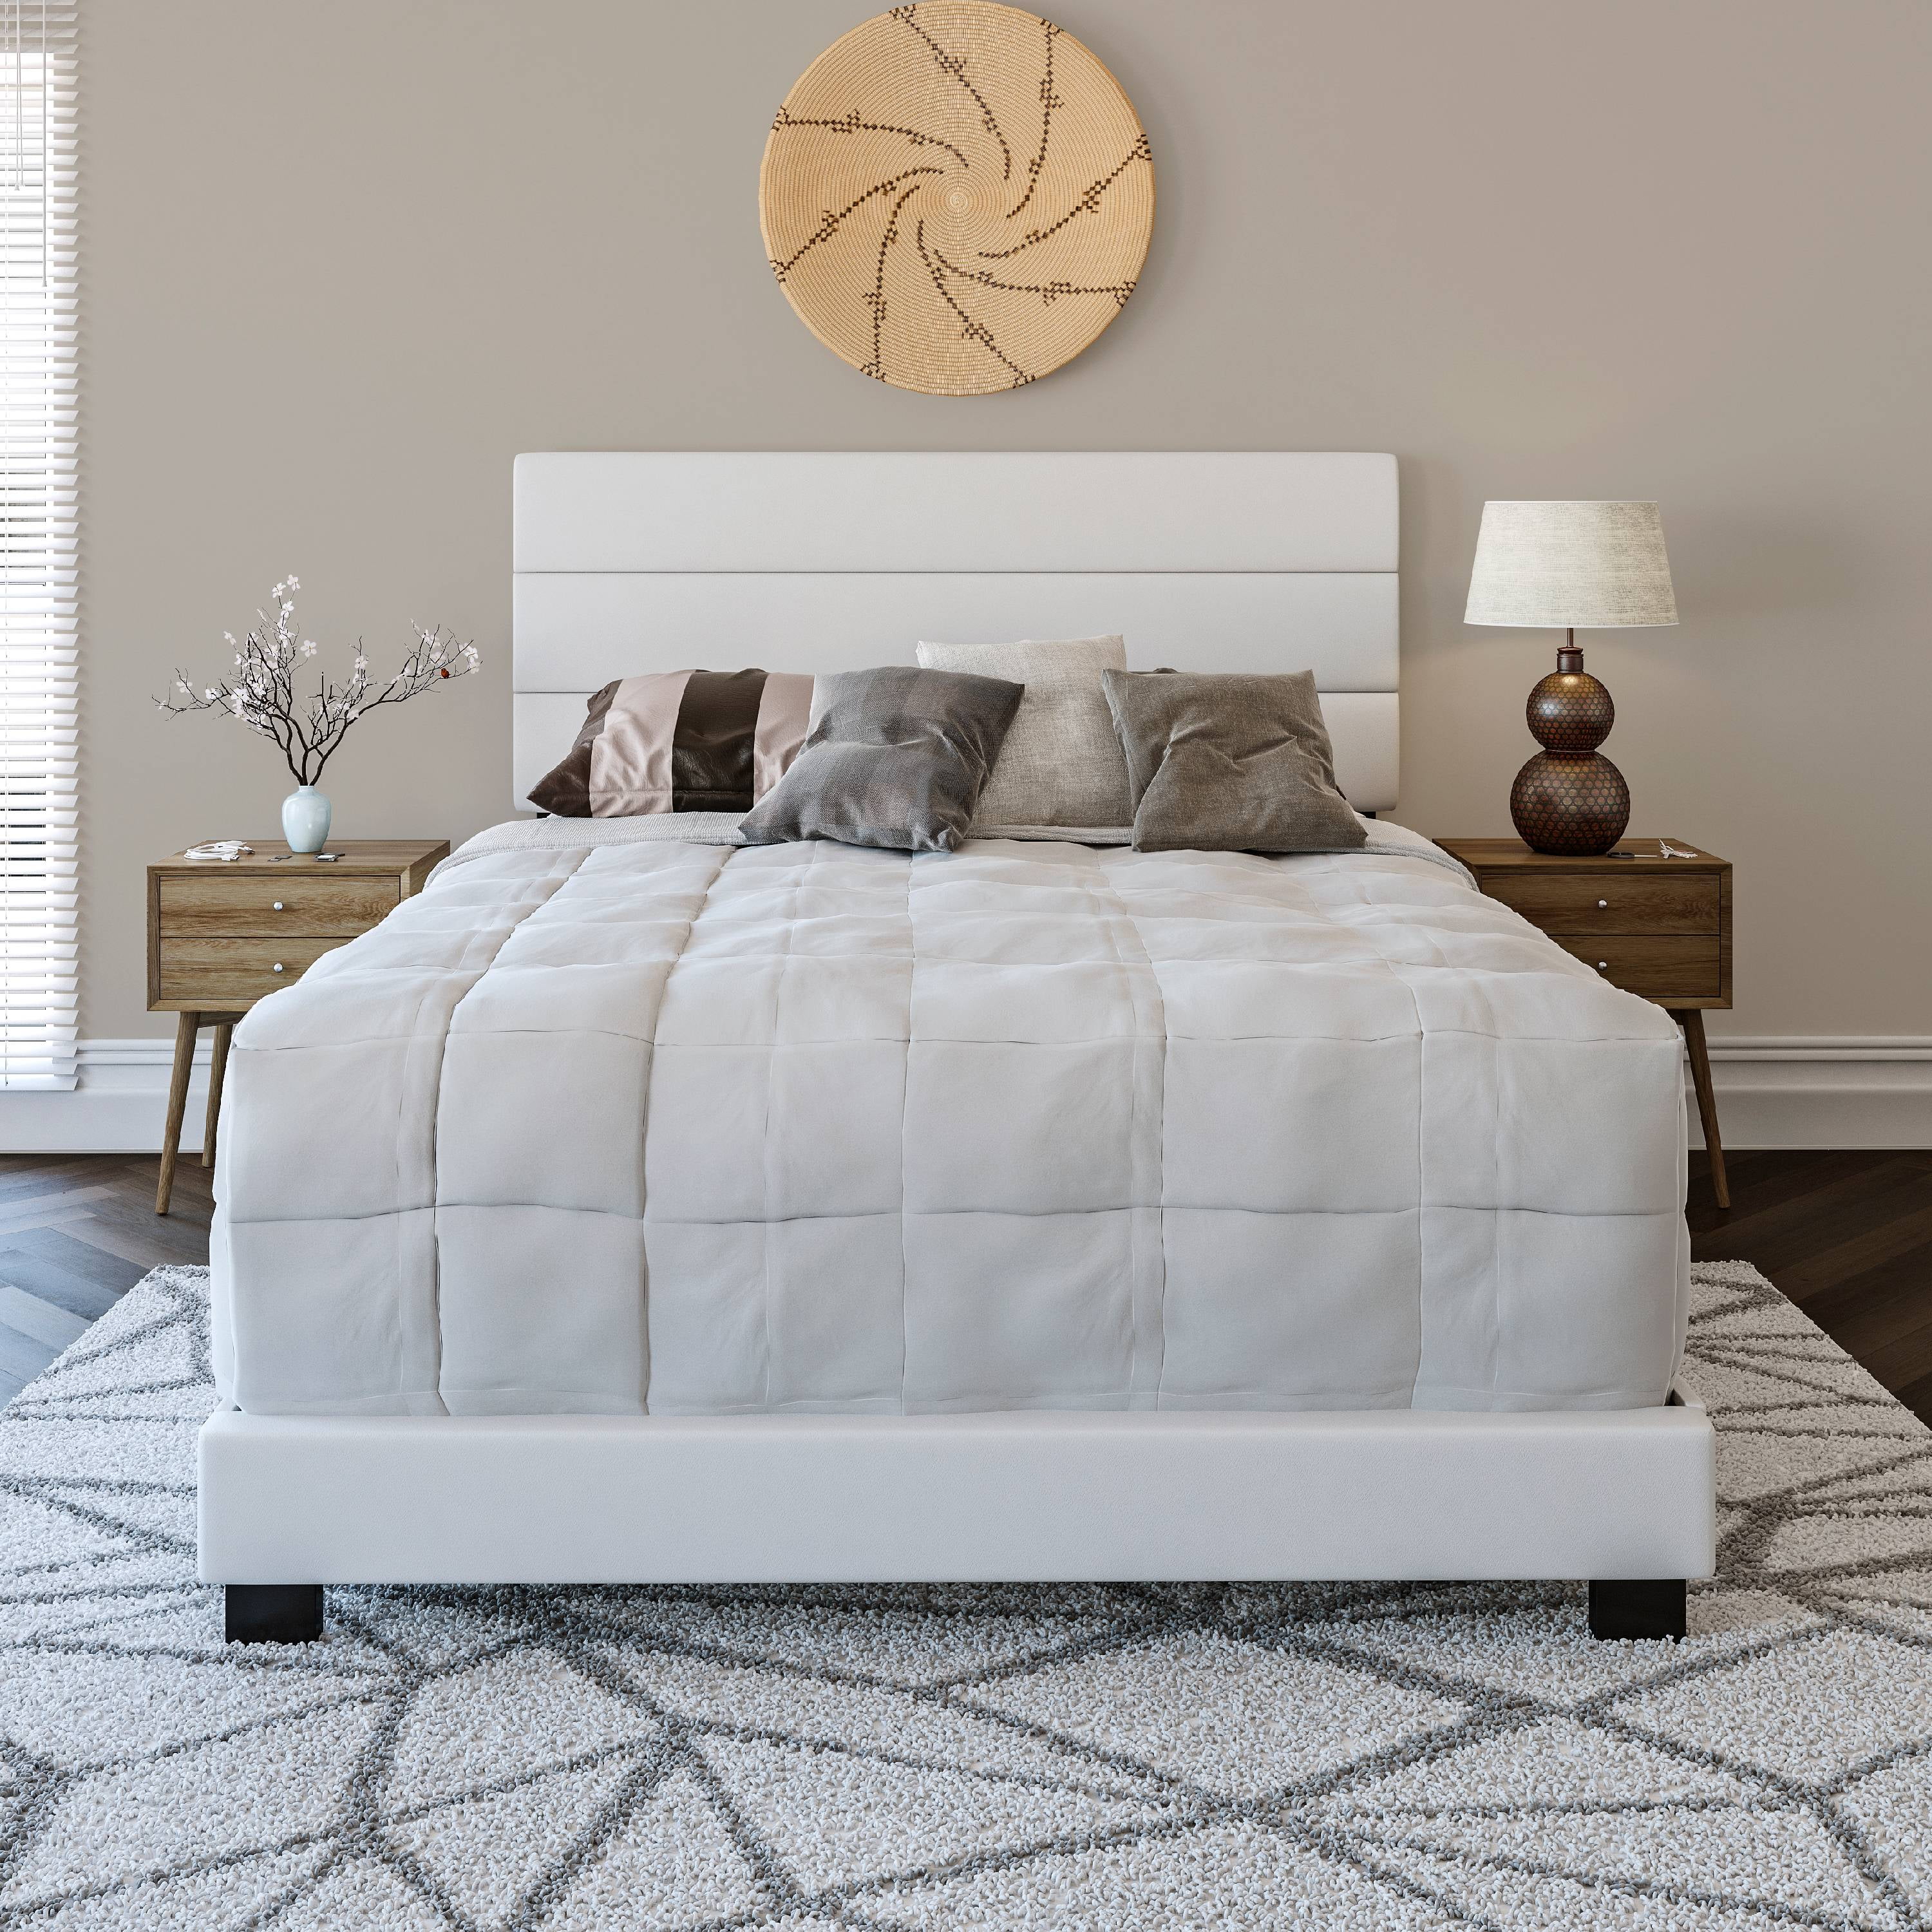 Premier Rapallo Upholstered Faux, White Leather Headboard King Size